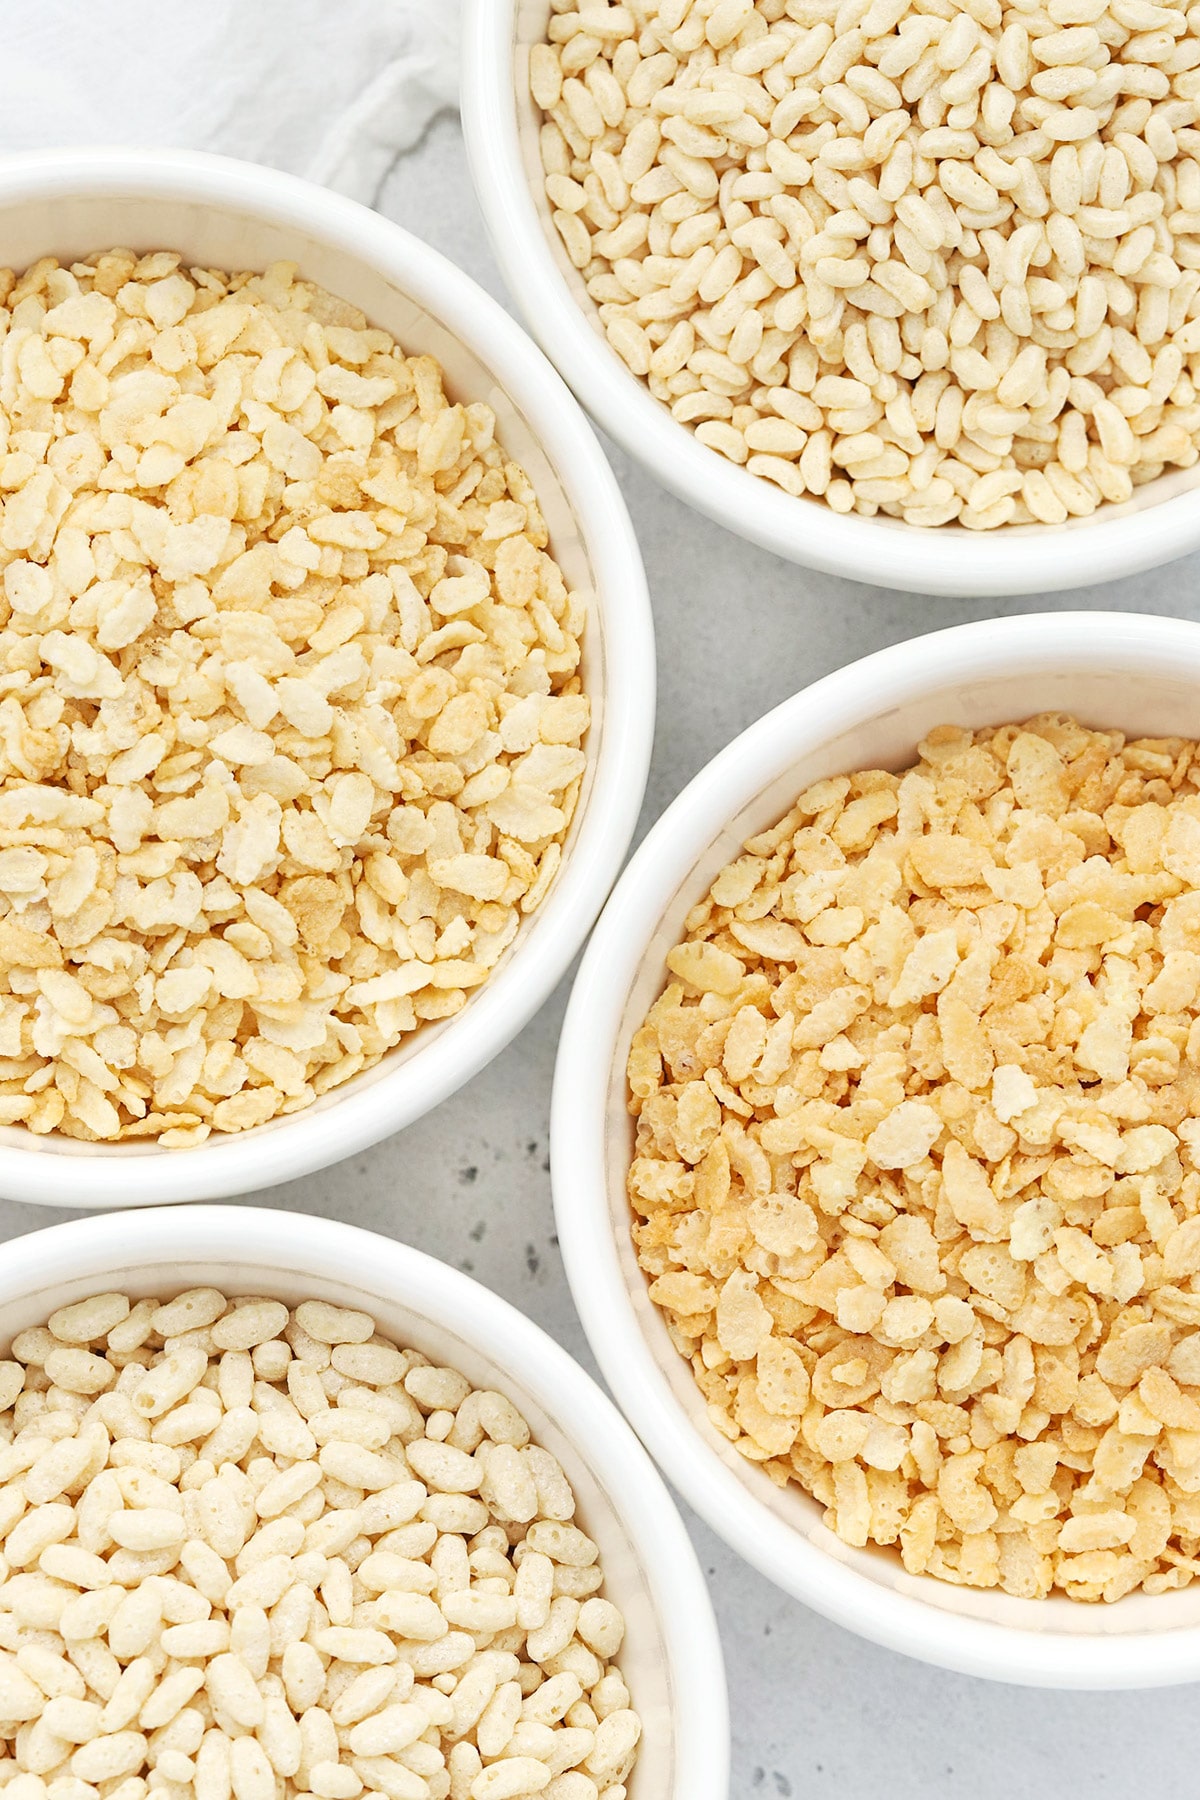 Overhead view of four bowls of gluten-free crisp rice cereals